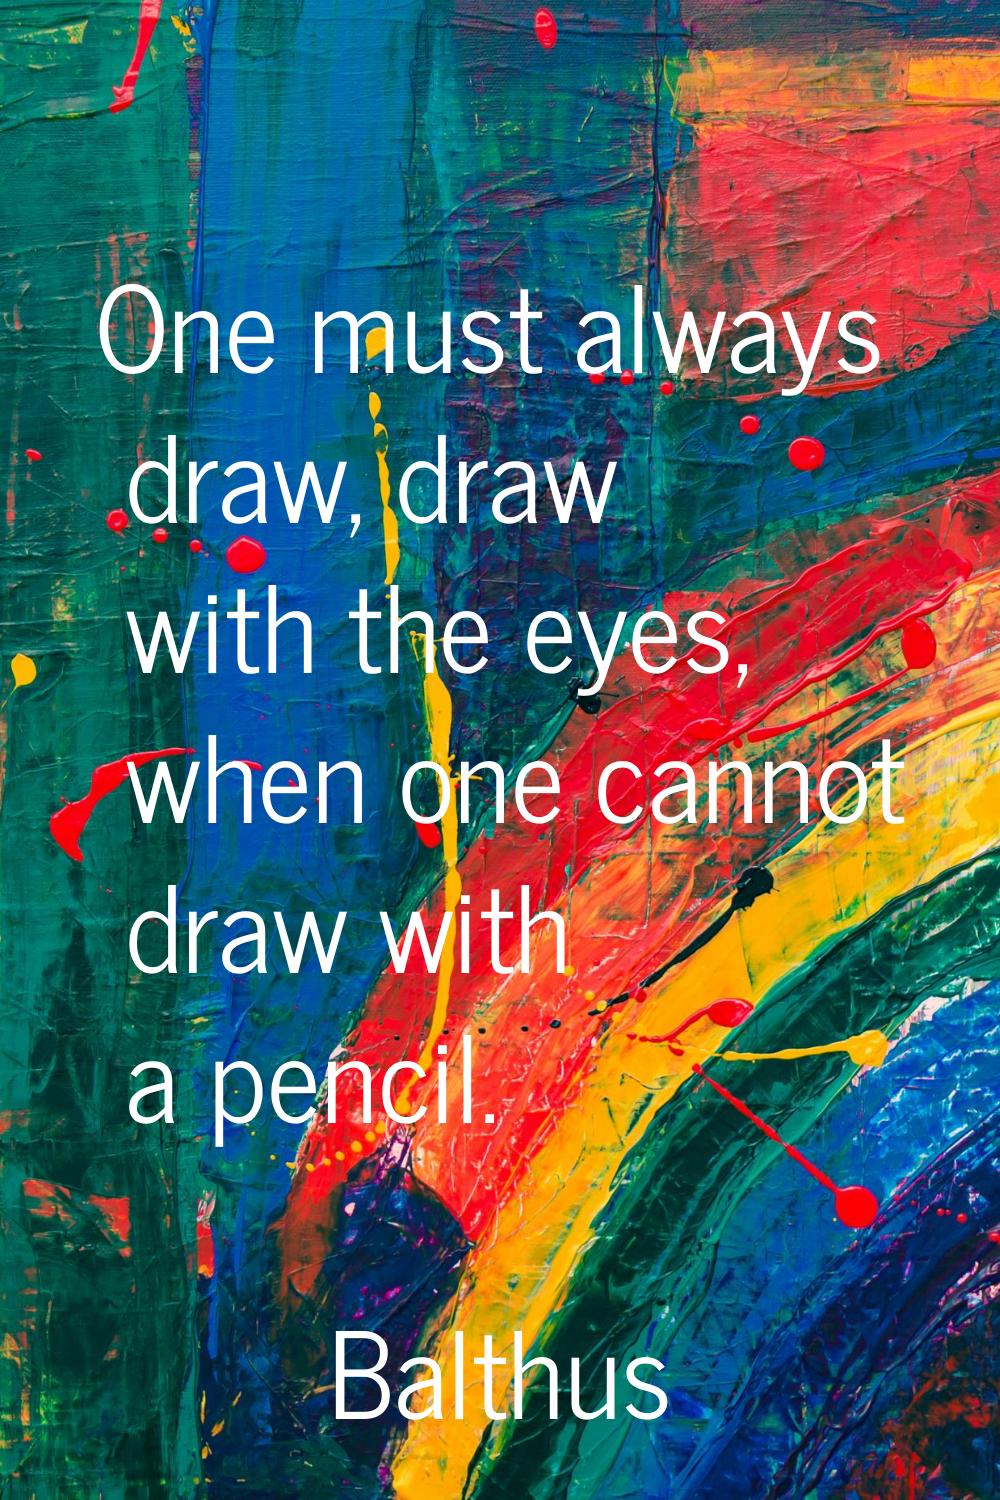 One must always draw, draw with the eyes, when one cannot draw with a pencil.